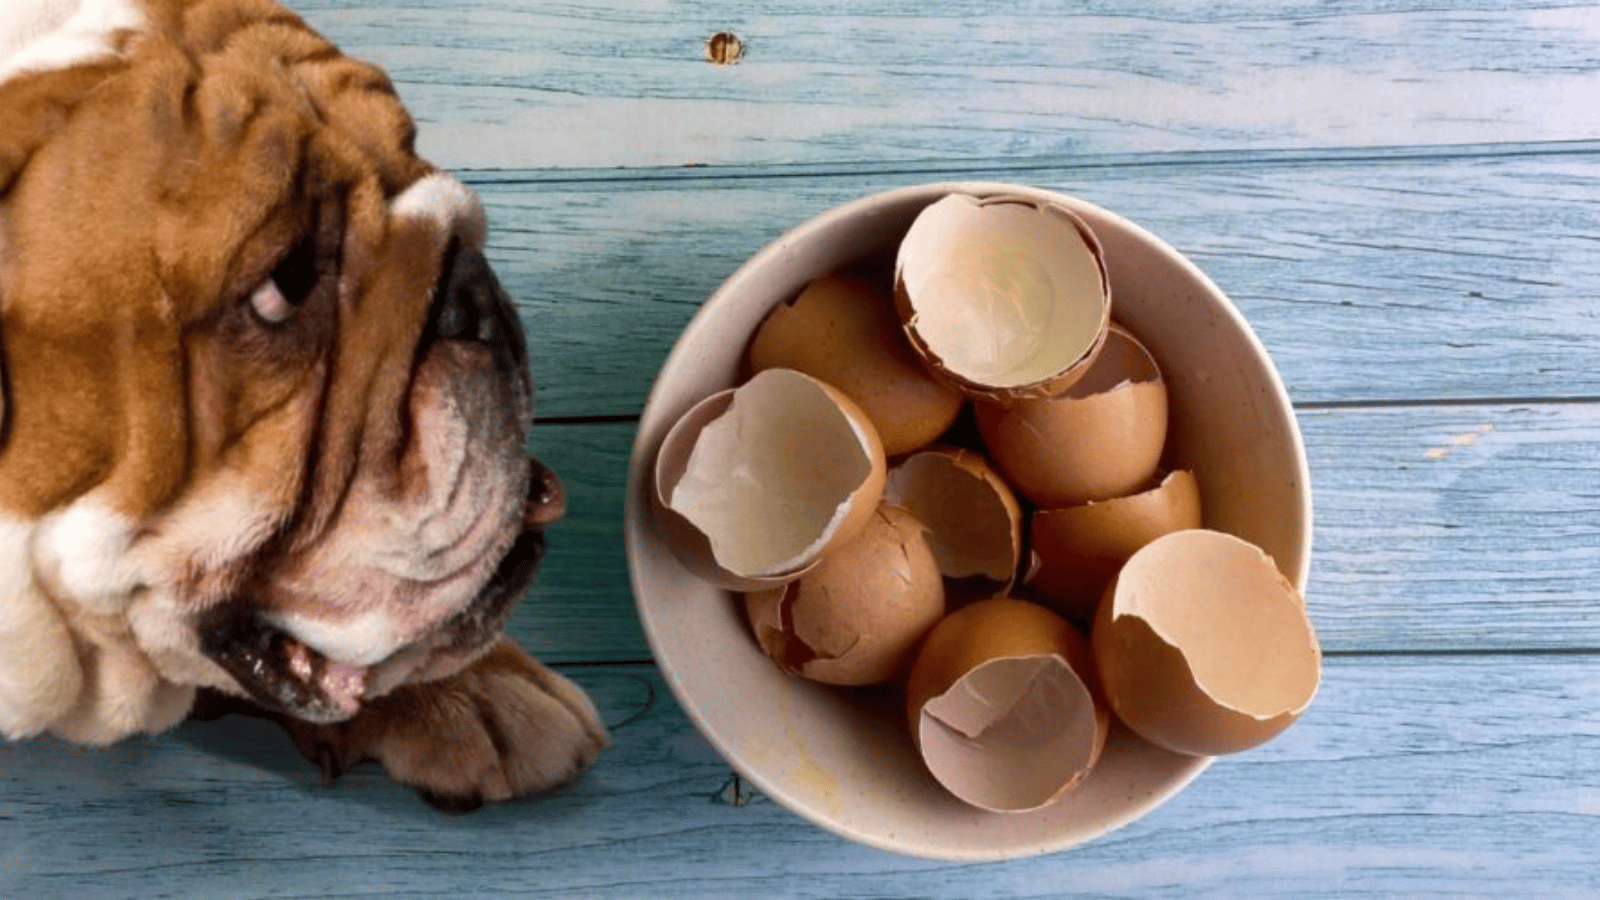 Are Egg Shells Good for Dogs